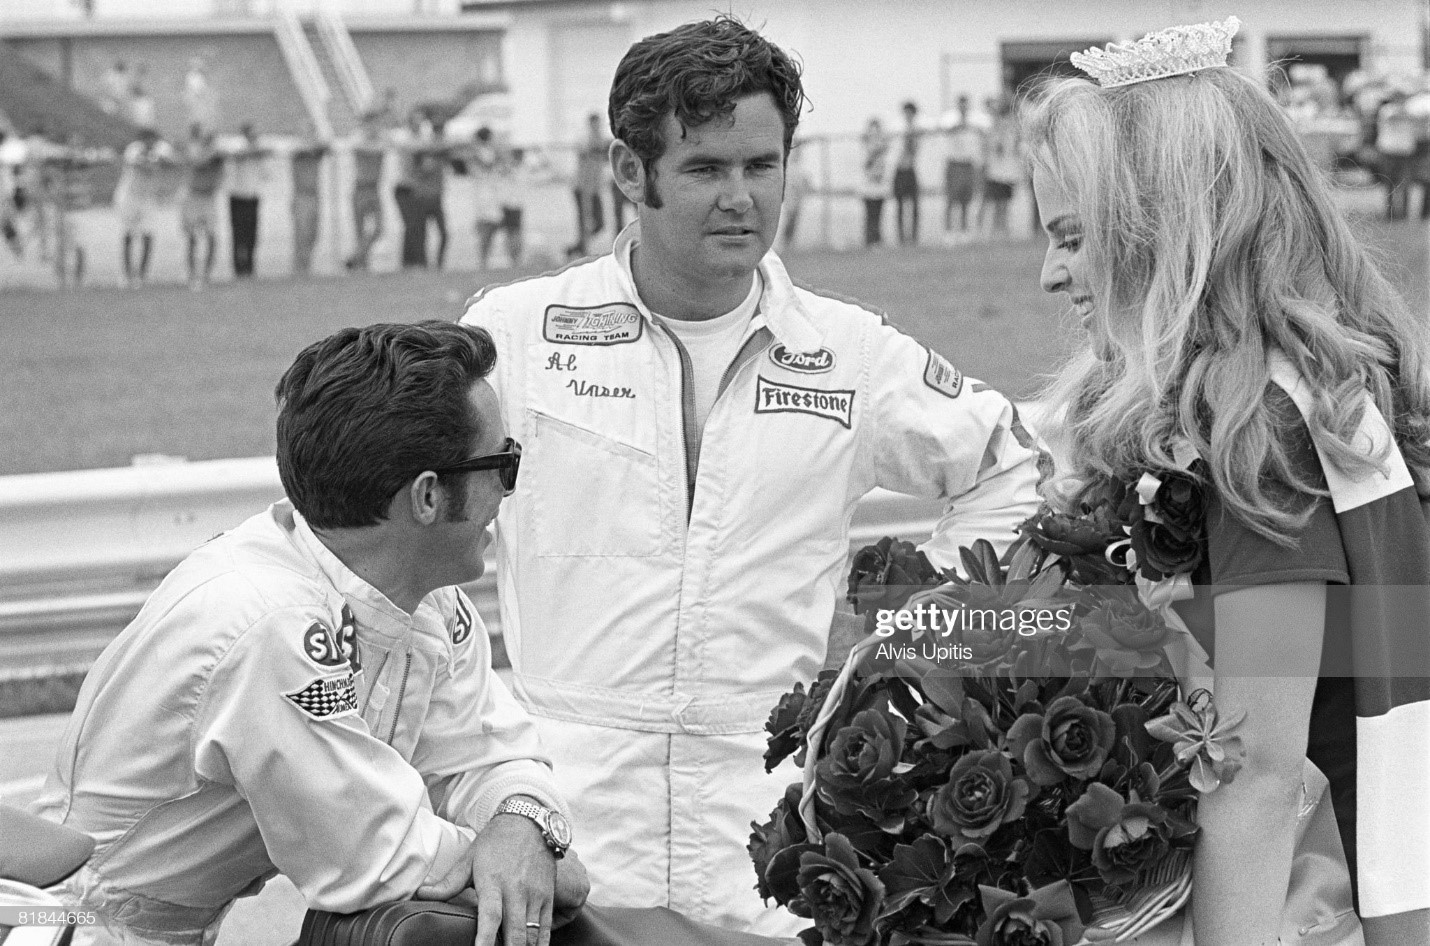 Mario Andretti (left) and Al Unser chat with the race queen before the start of the USAC INDY 150 Champ Car Race held on the road course at Indianapolis Raceway Park (IRP) on July 26, 1970 in Clermont, Indiana. 